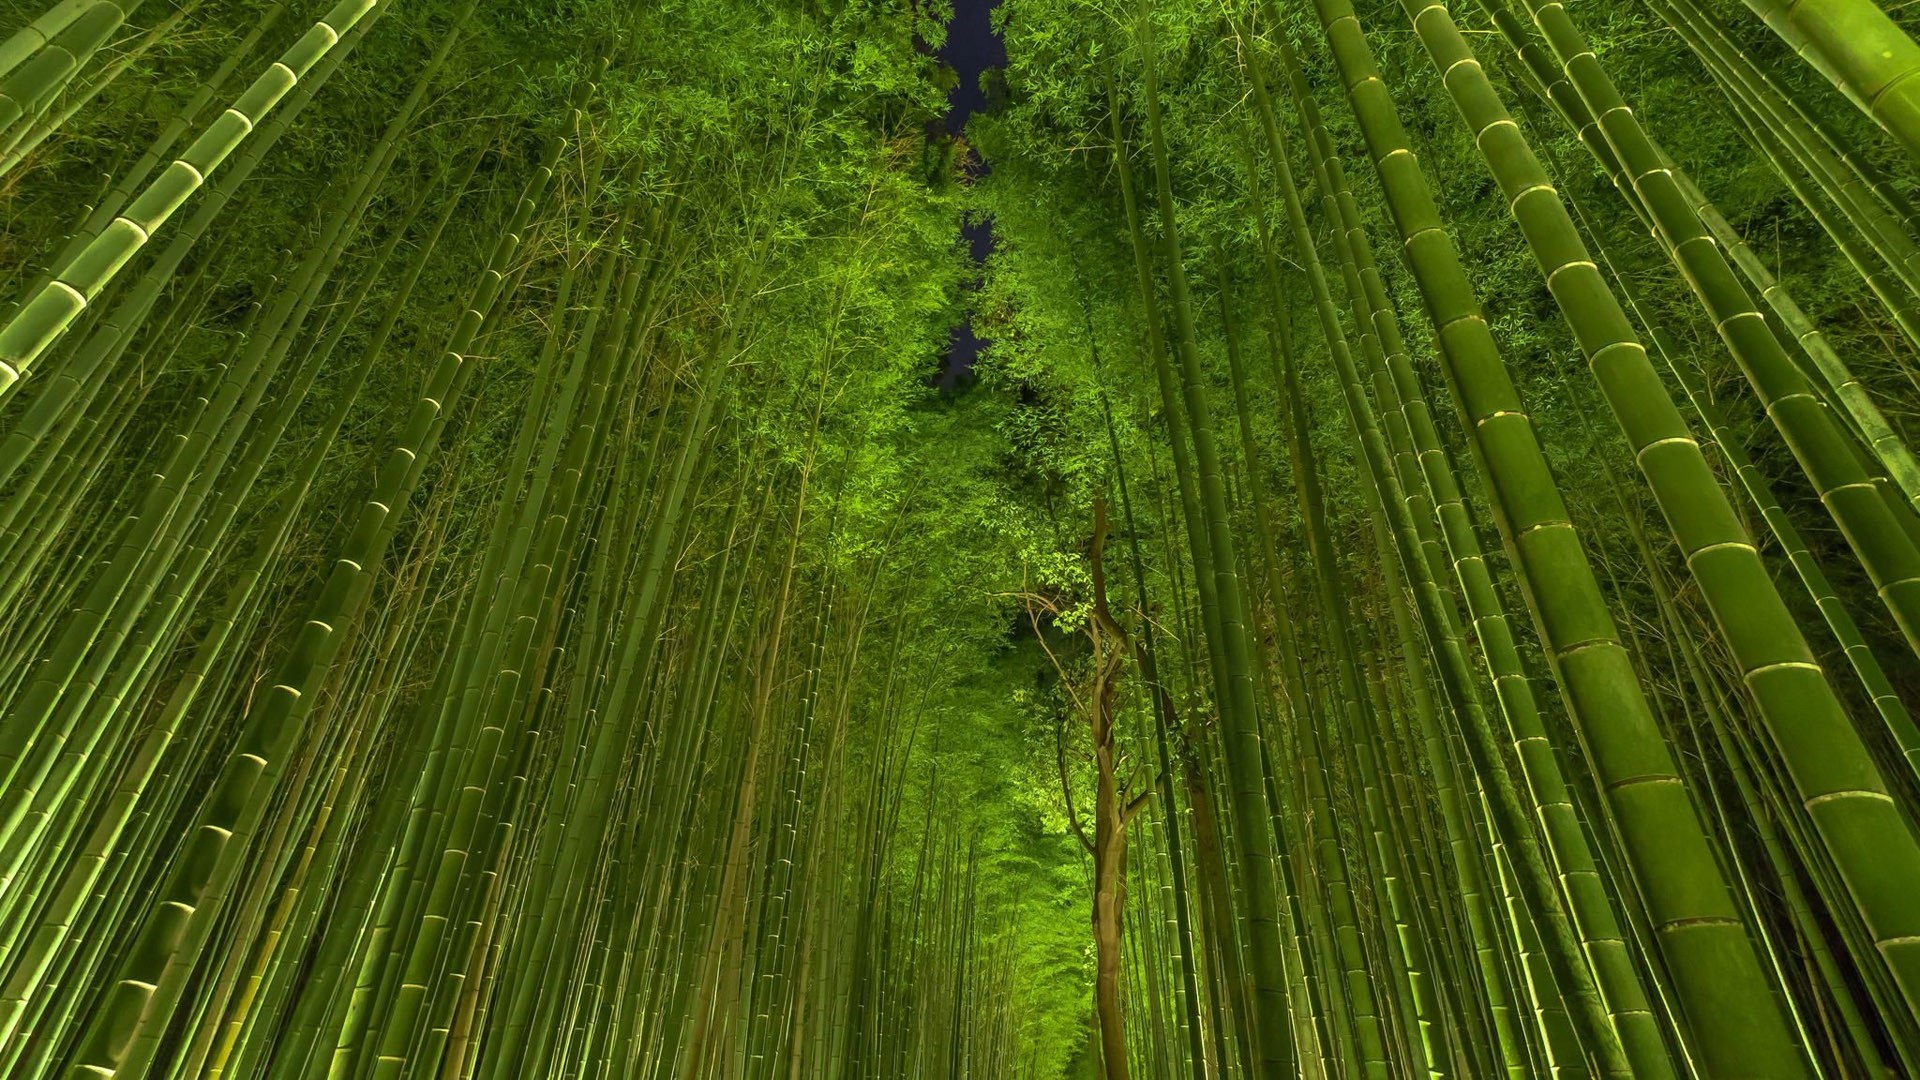 Bamboo: A tall treelike tropical grass having hollow woody-walled stems, Tropical forest. 1920x1080 Full HD Wallpaper.